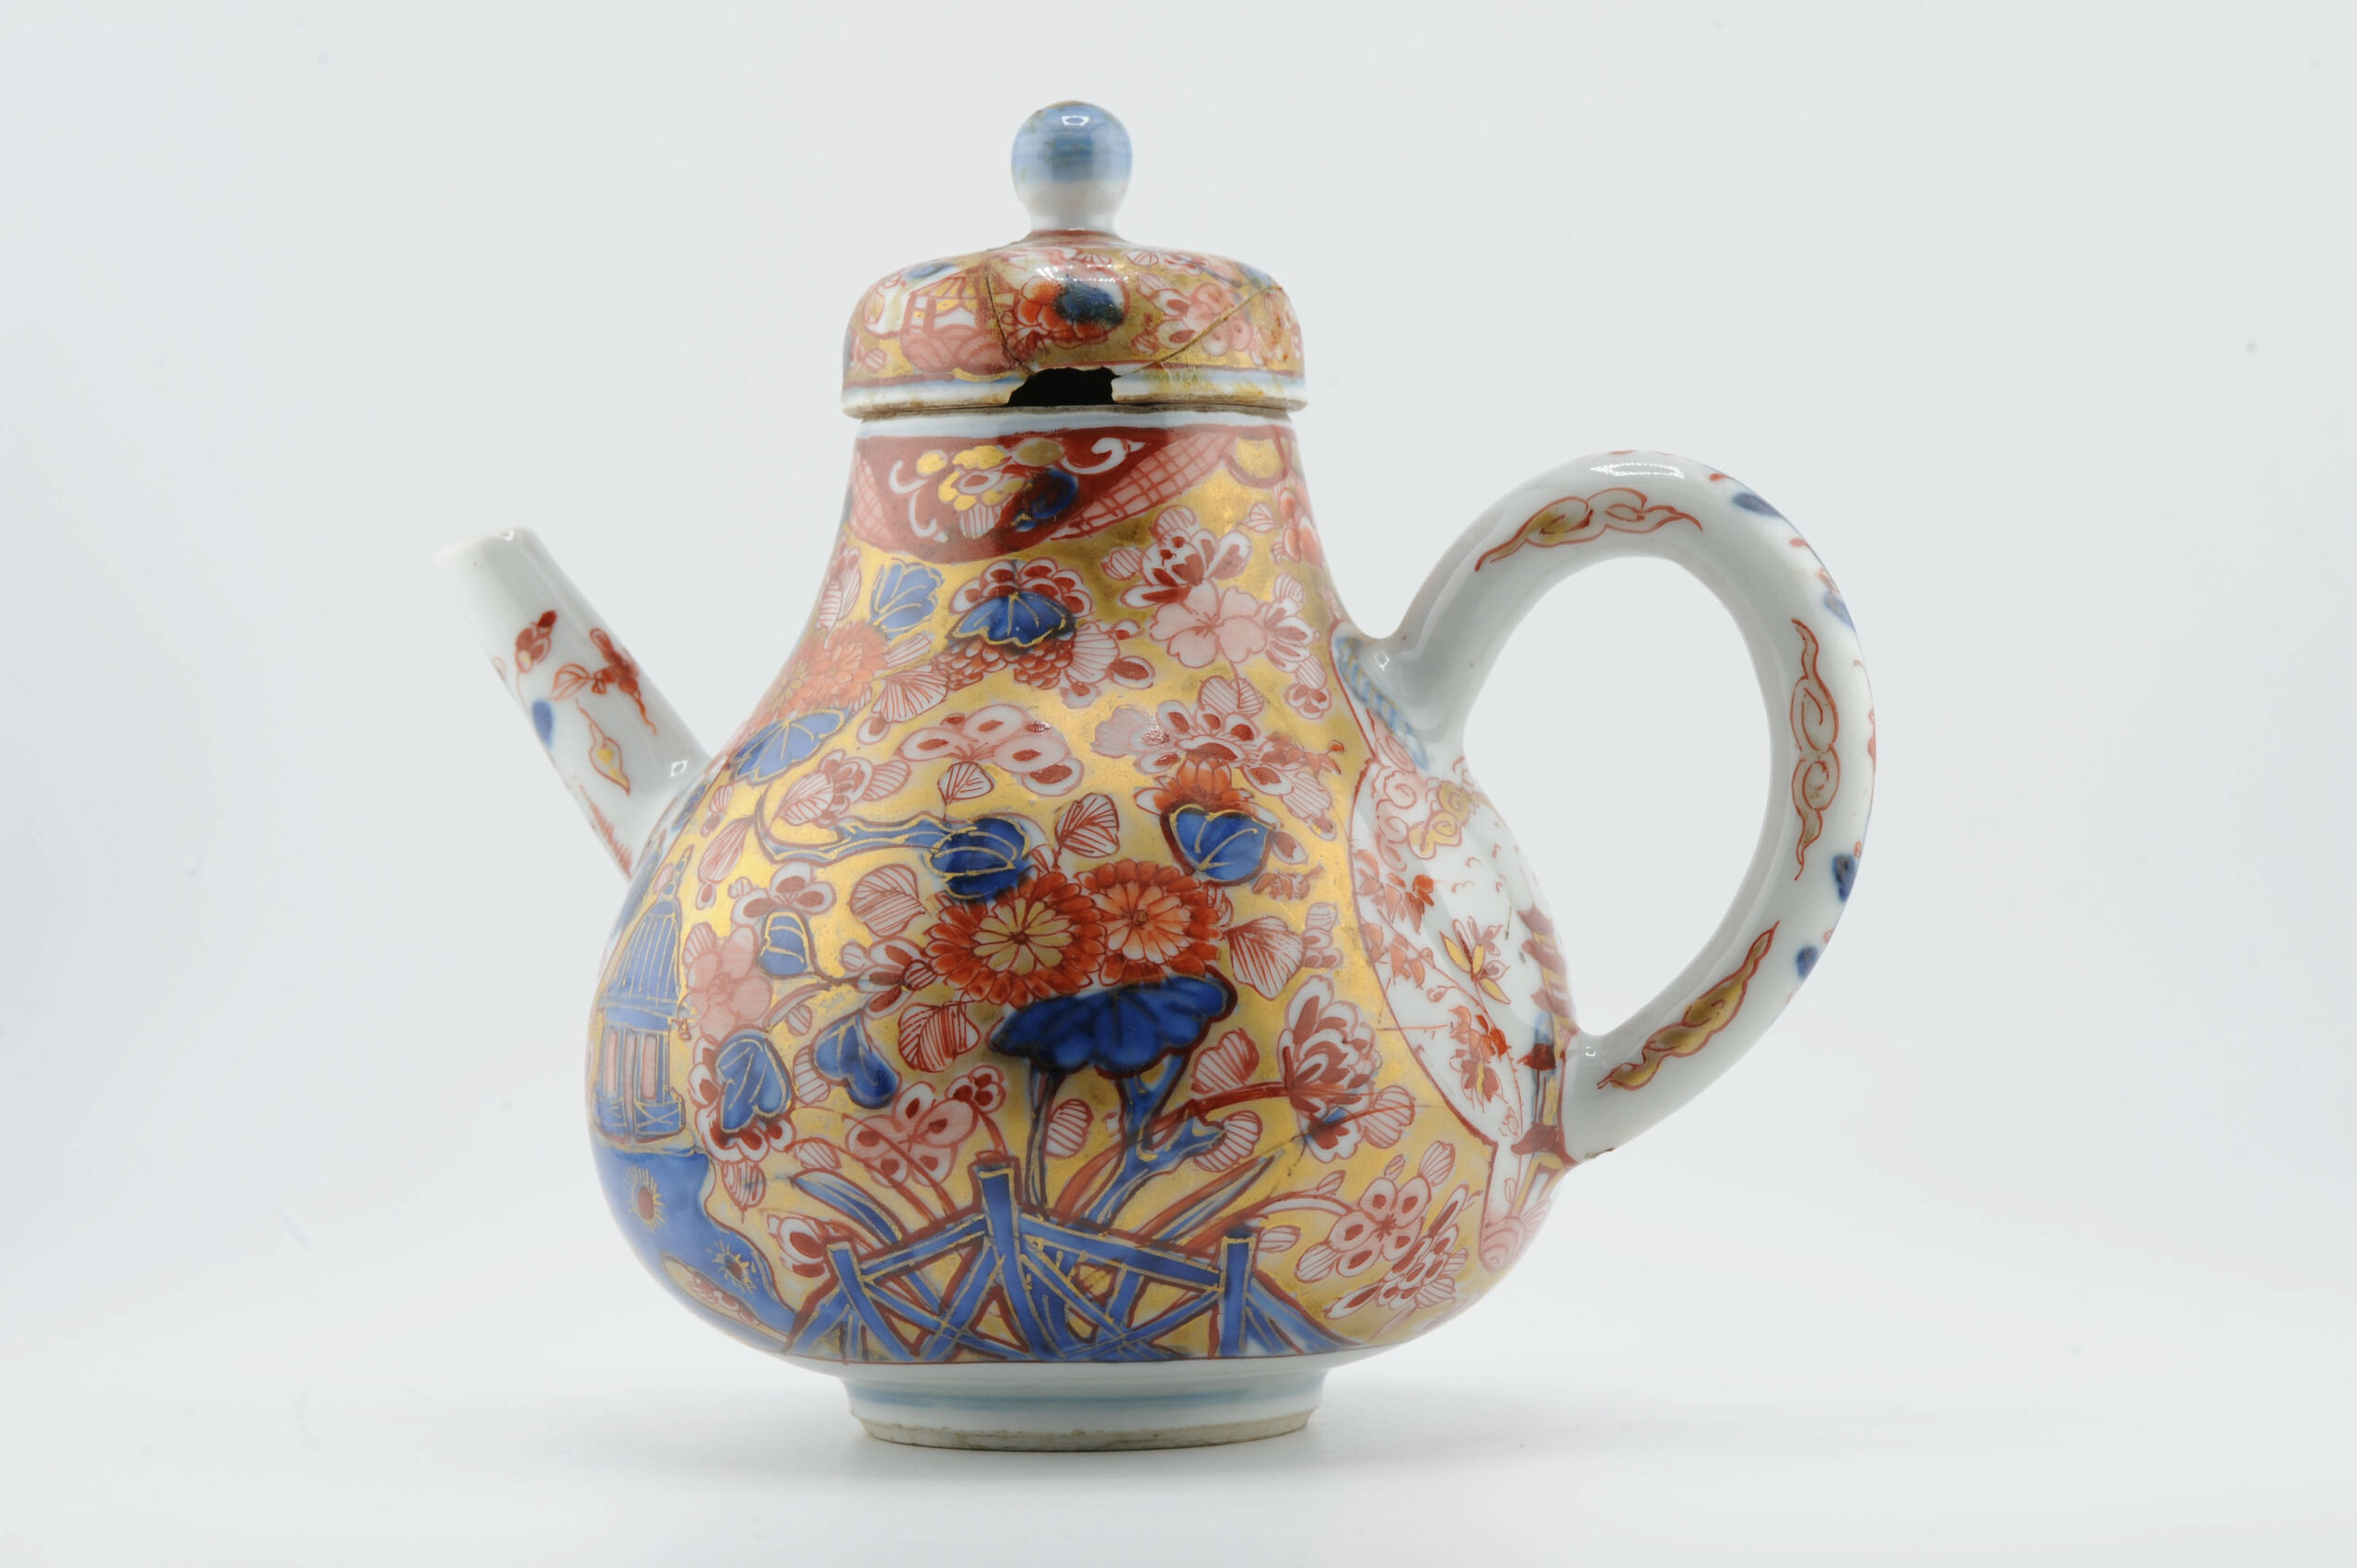 1345 Antique Ca 1710-1730 Teapot. Redecorated in the UK.